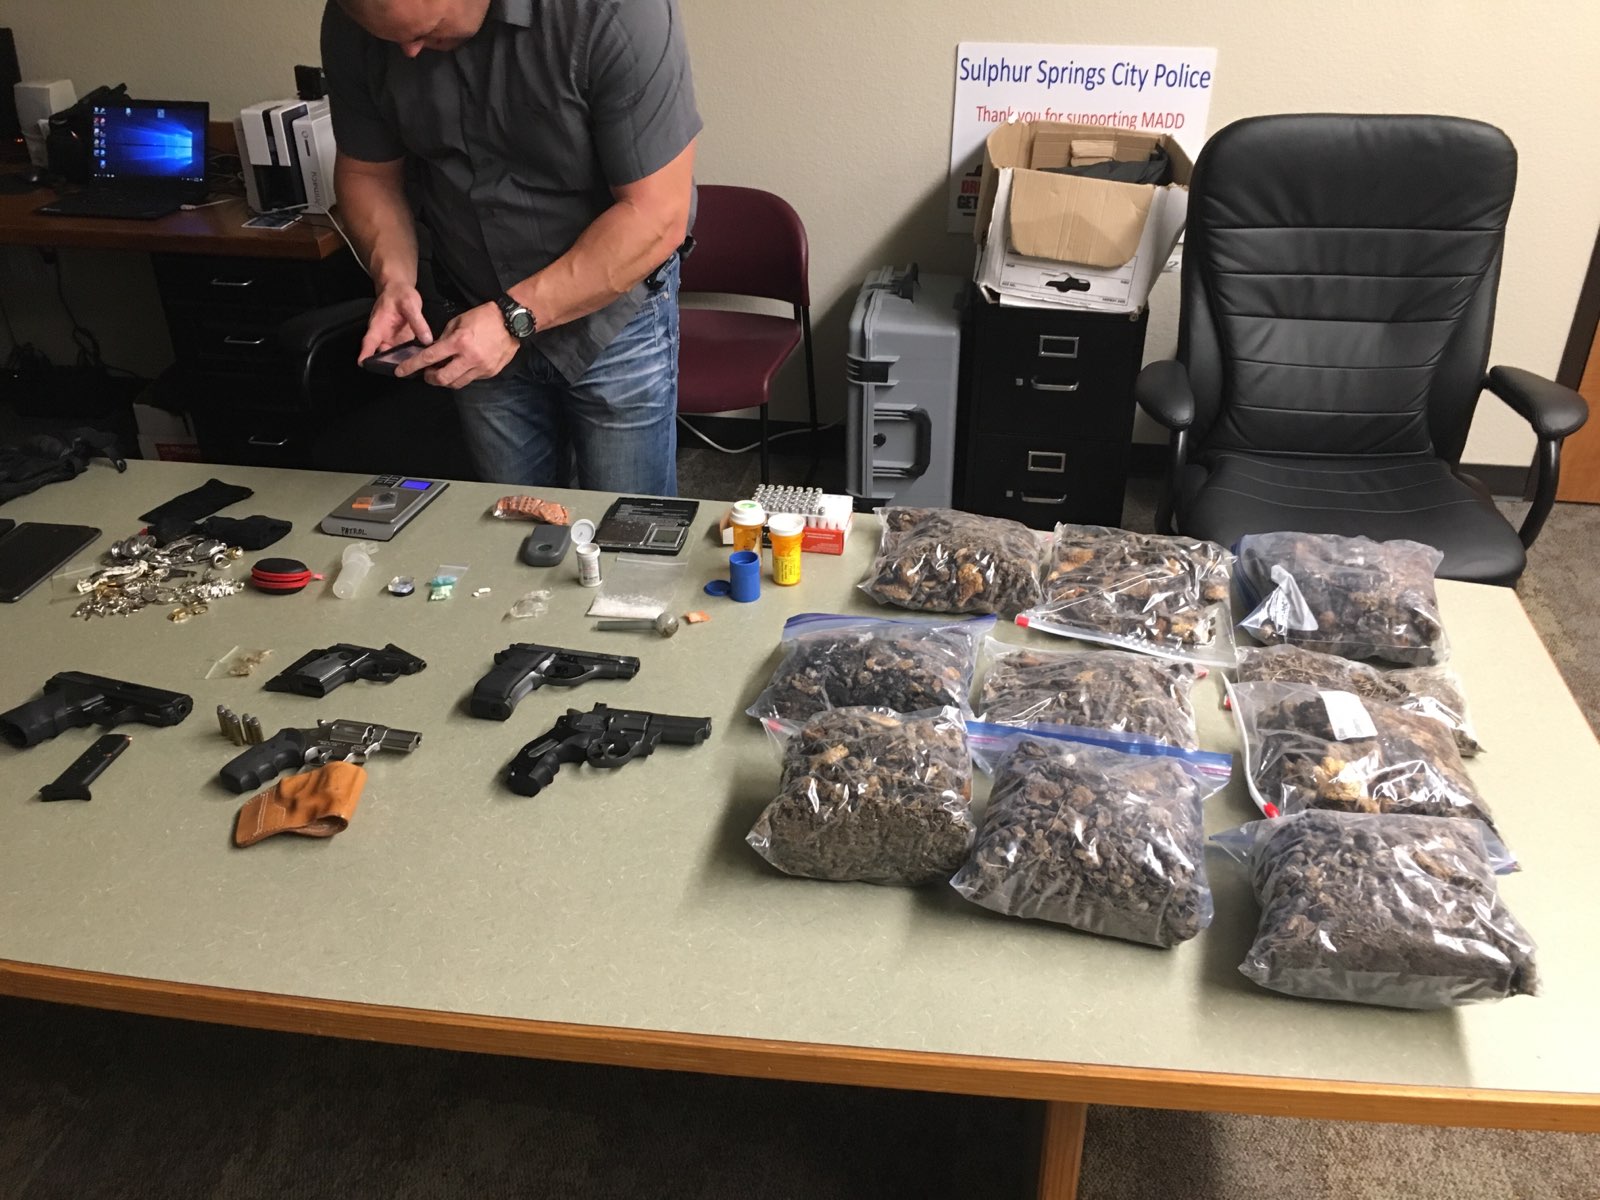 Sulphur Springs Special Crimes Unit Investigation Leads to Arrest of Local Man with Large Quantity of Drugs including Mushrooms, Methamphetamine, and Heroin